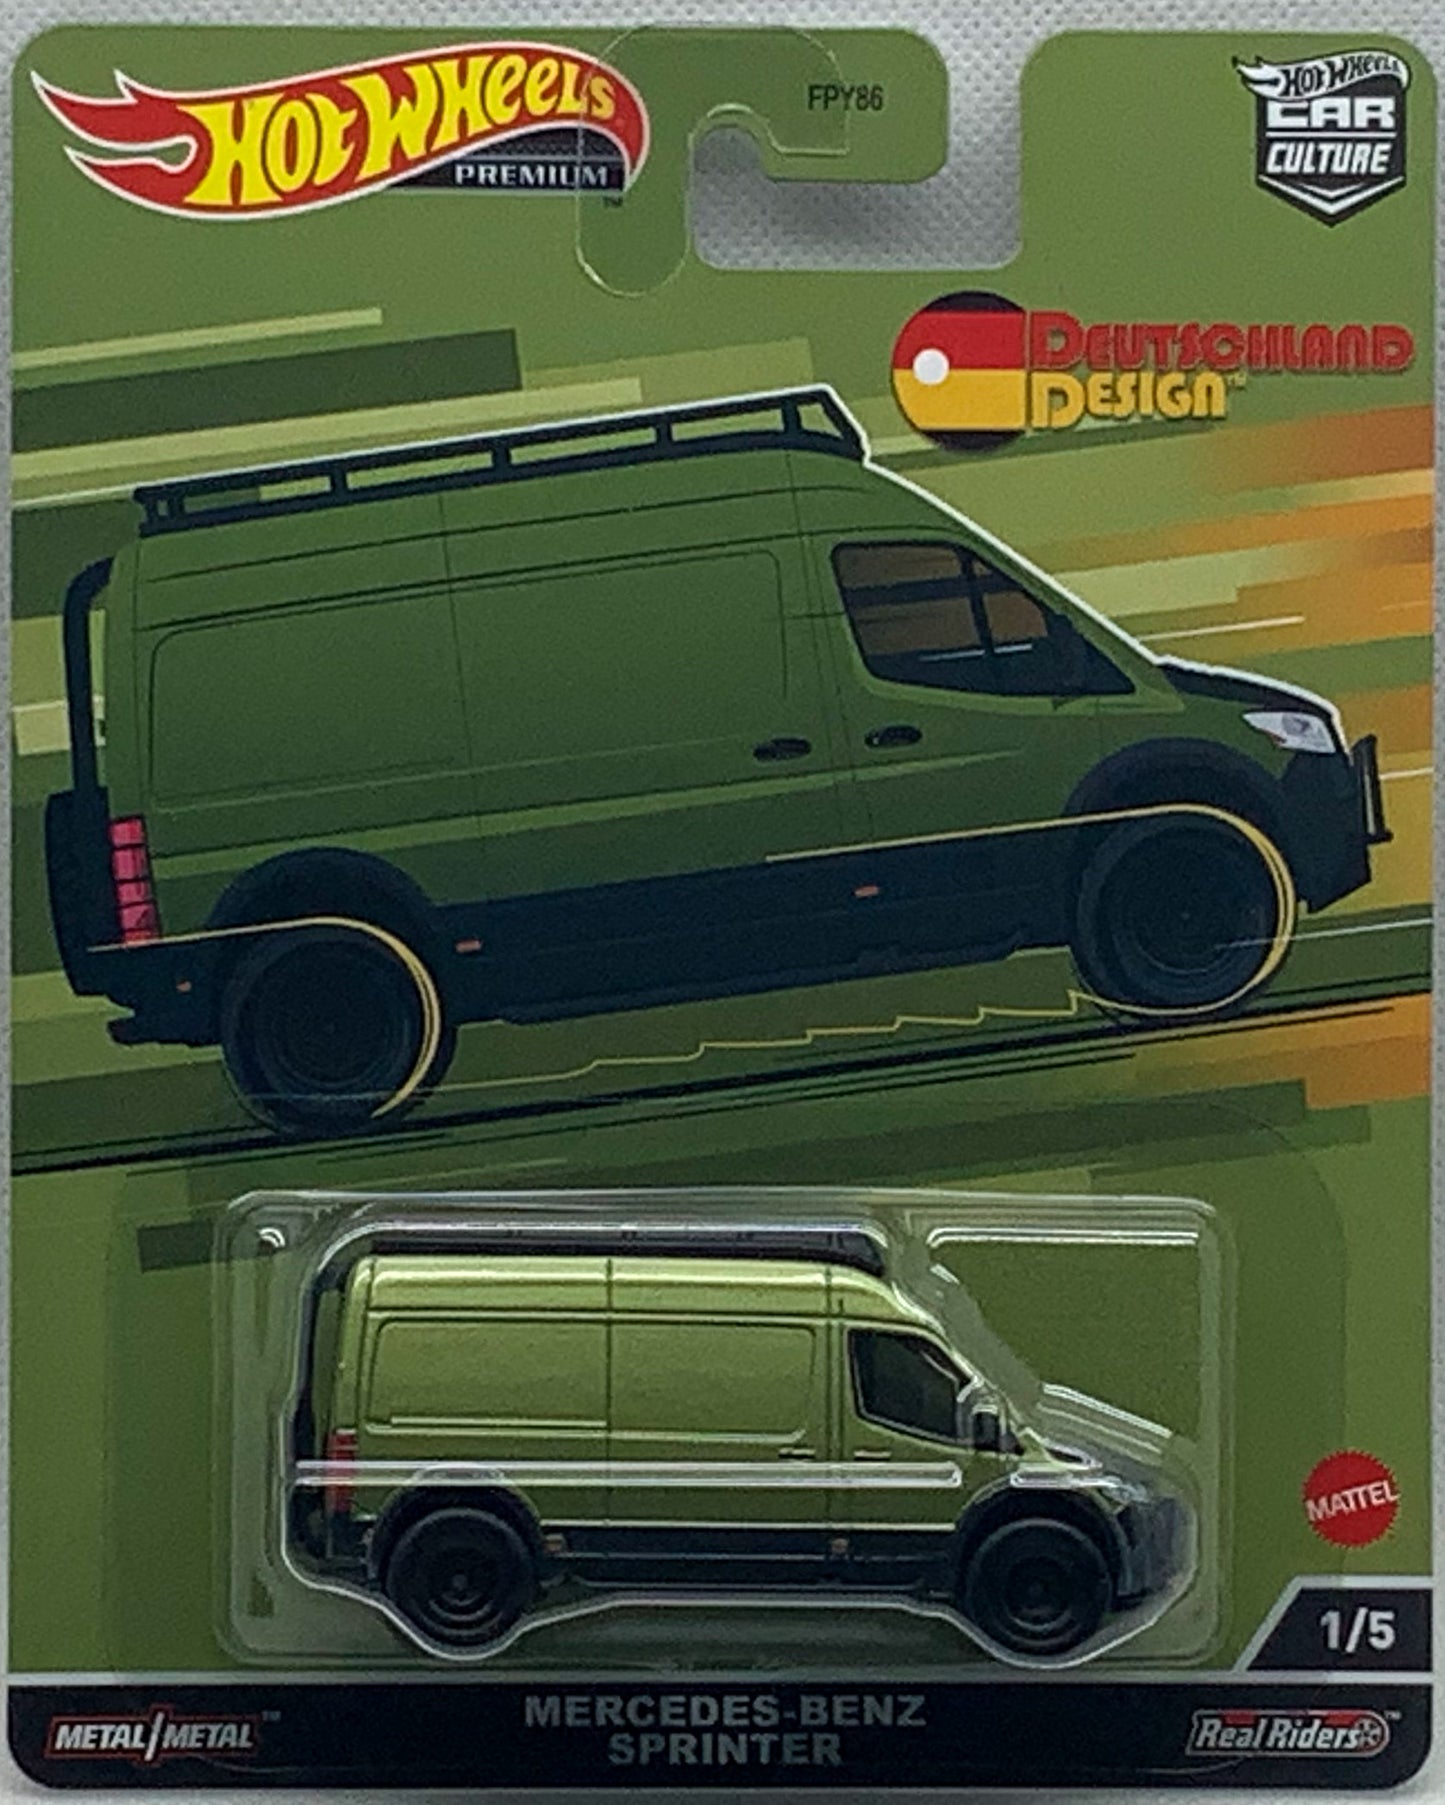 Buy at Tatoy Hot Wheels Car Culture Mercedes-Benz Sprinter Tourer 1/5 Number 1 from the set of 5 Deutschland Design Series Premium Real Riders Metal Mattel FPY86 Shop Now